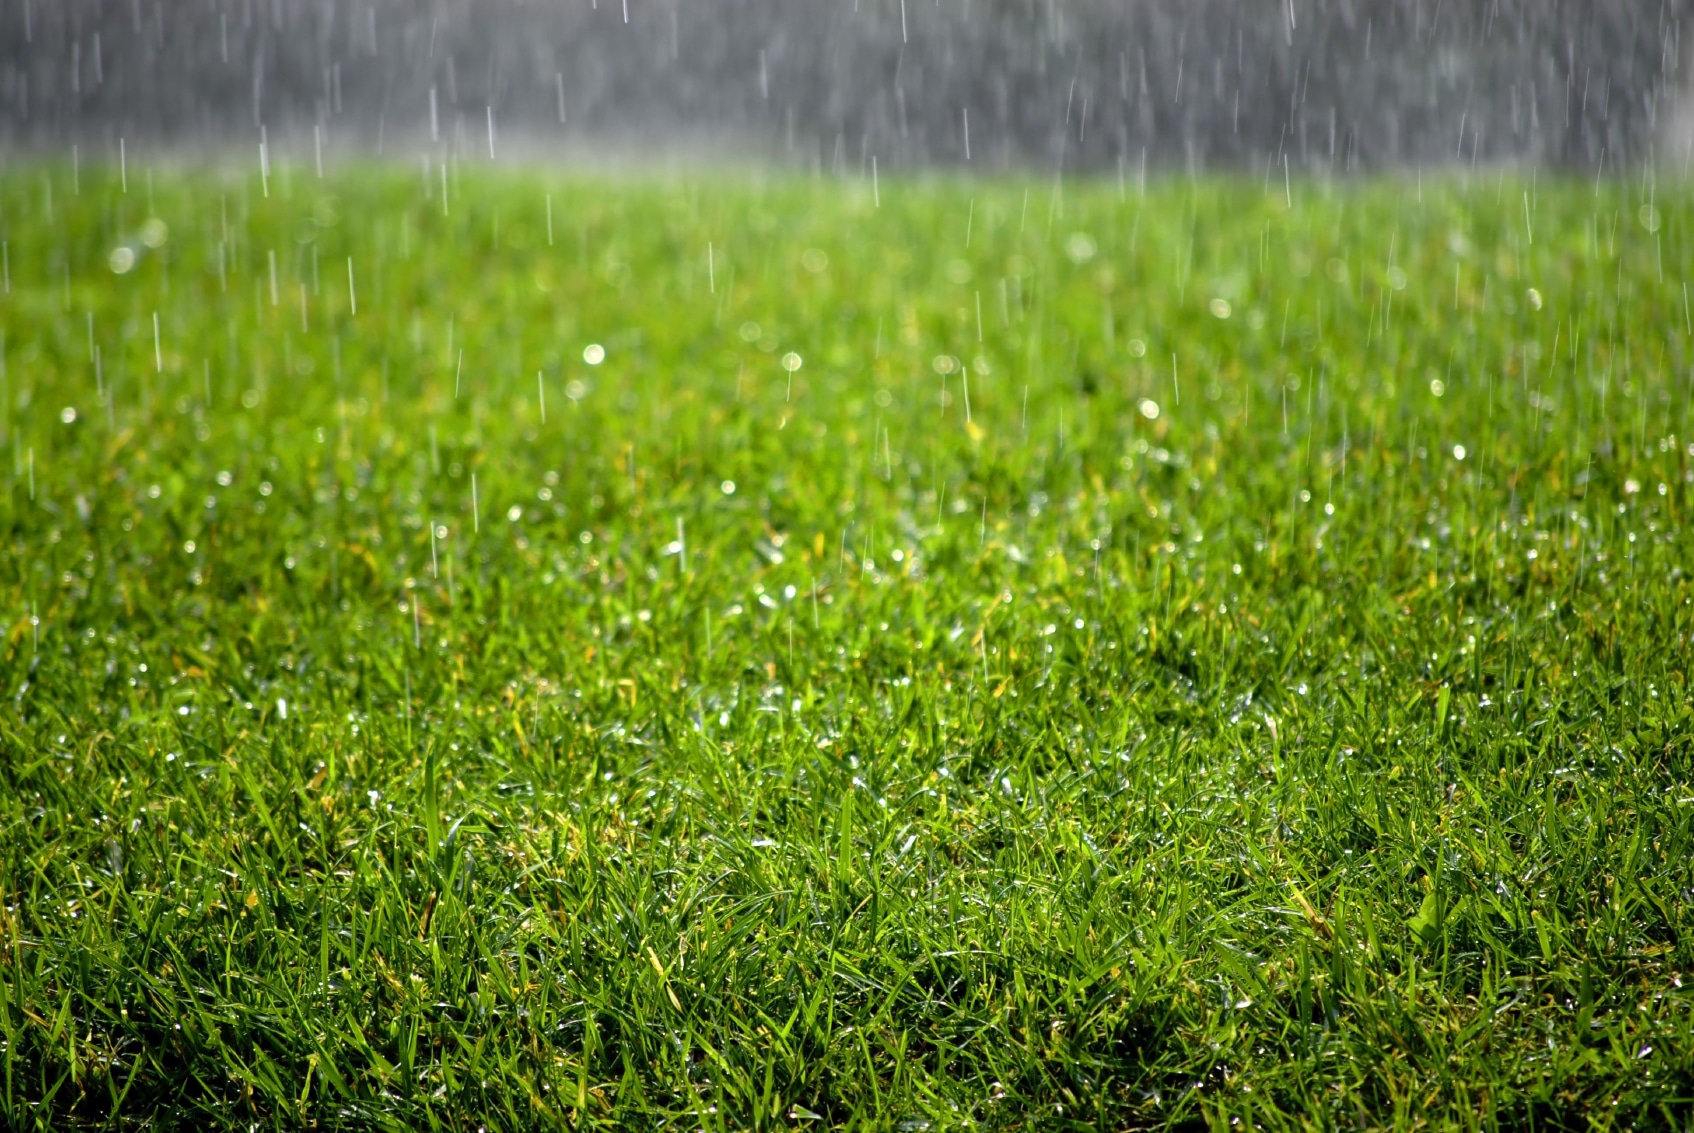 5 Tips to Keep Artificial Grass Looking Great When It Rains